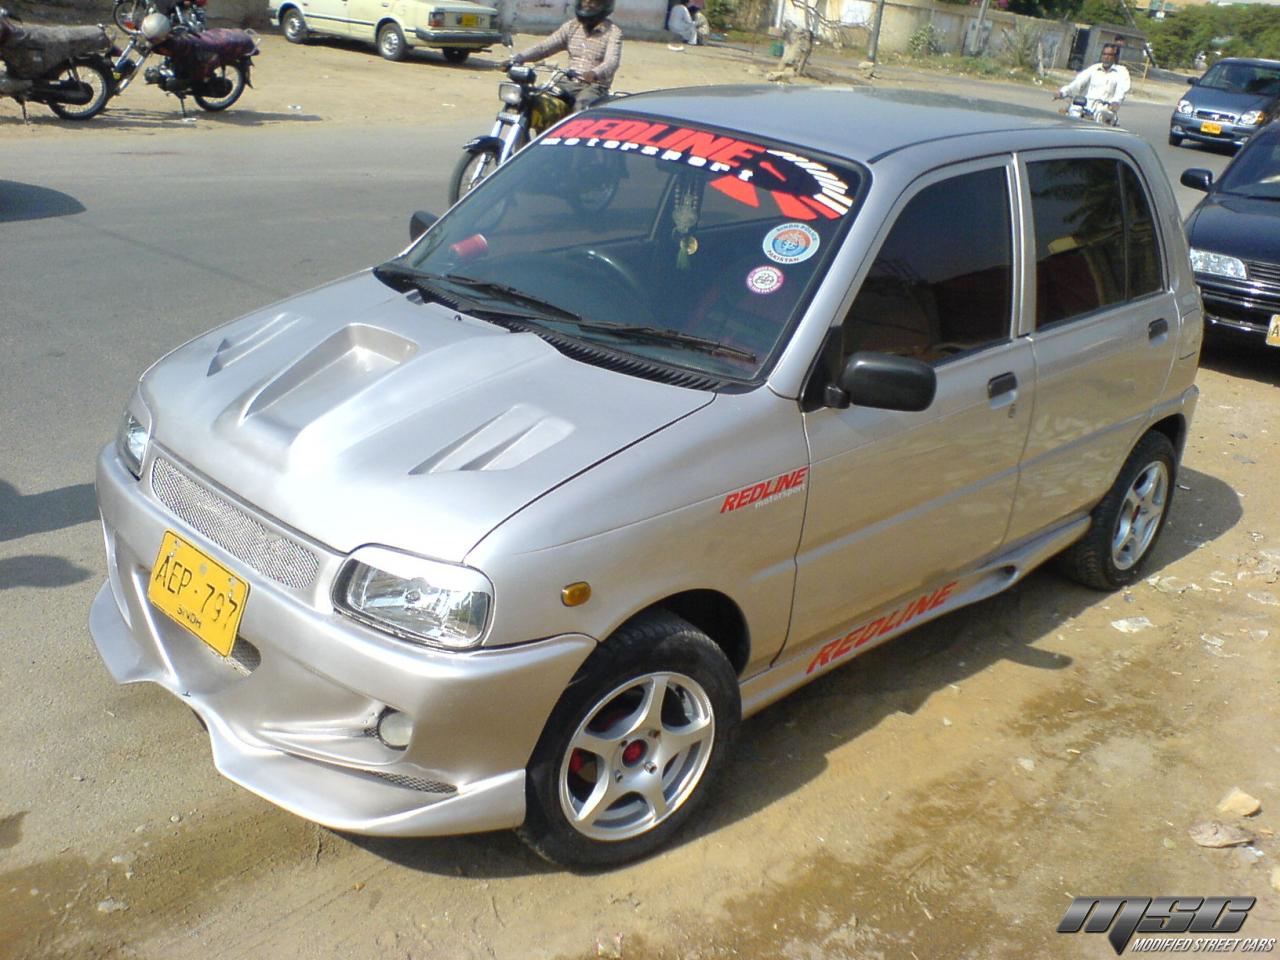 Daihatsu Cuore pictures & info | Modified Street Cars